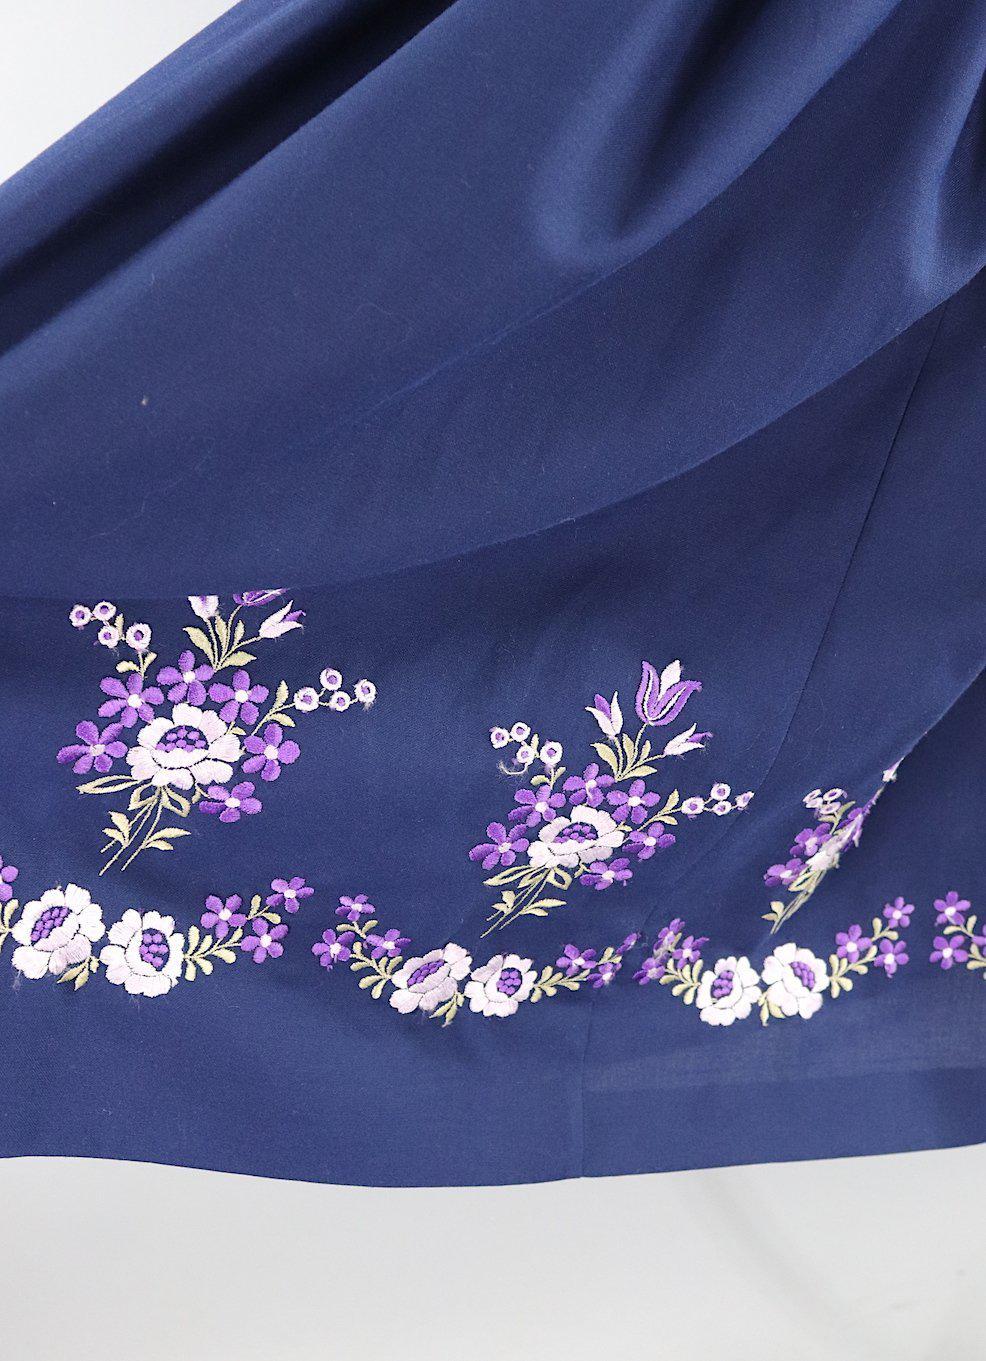 Vintage Blue Dress with Purple Floral Embroidery – ThisBlueBird